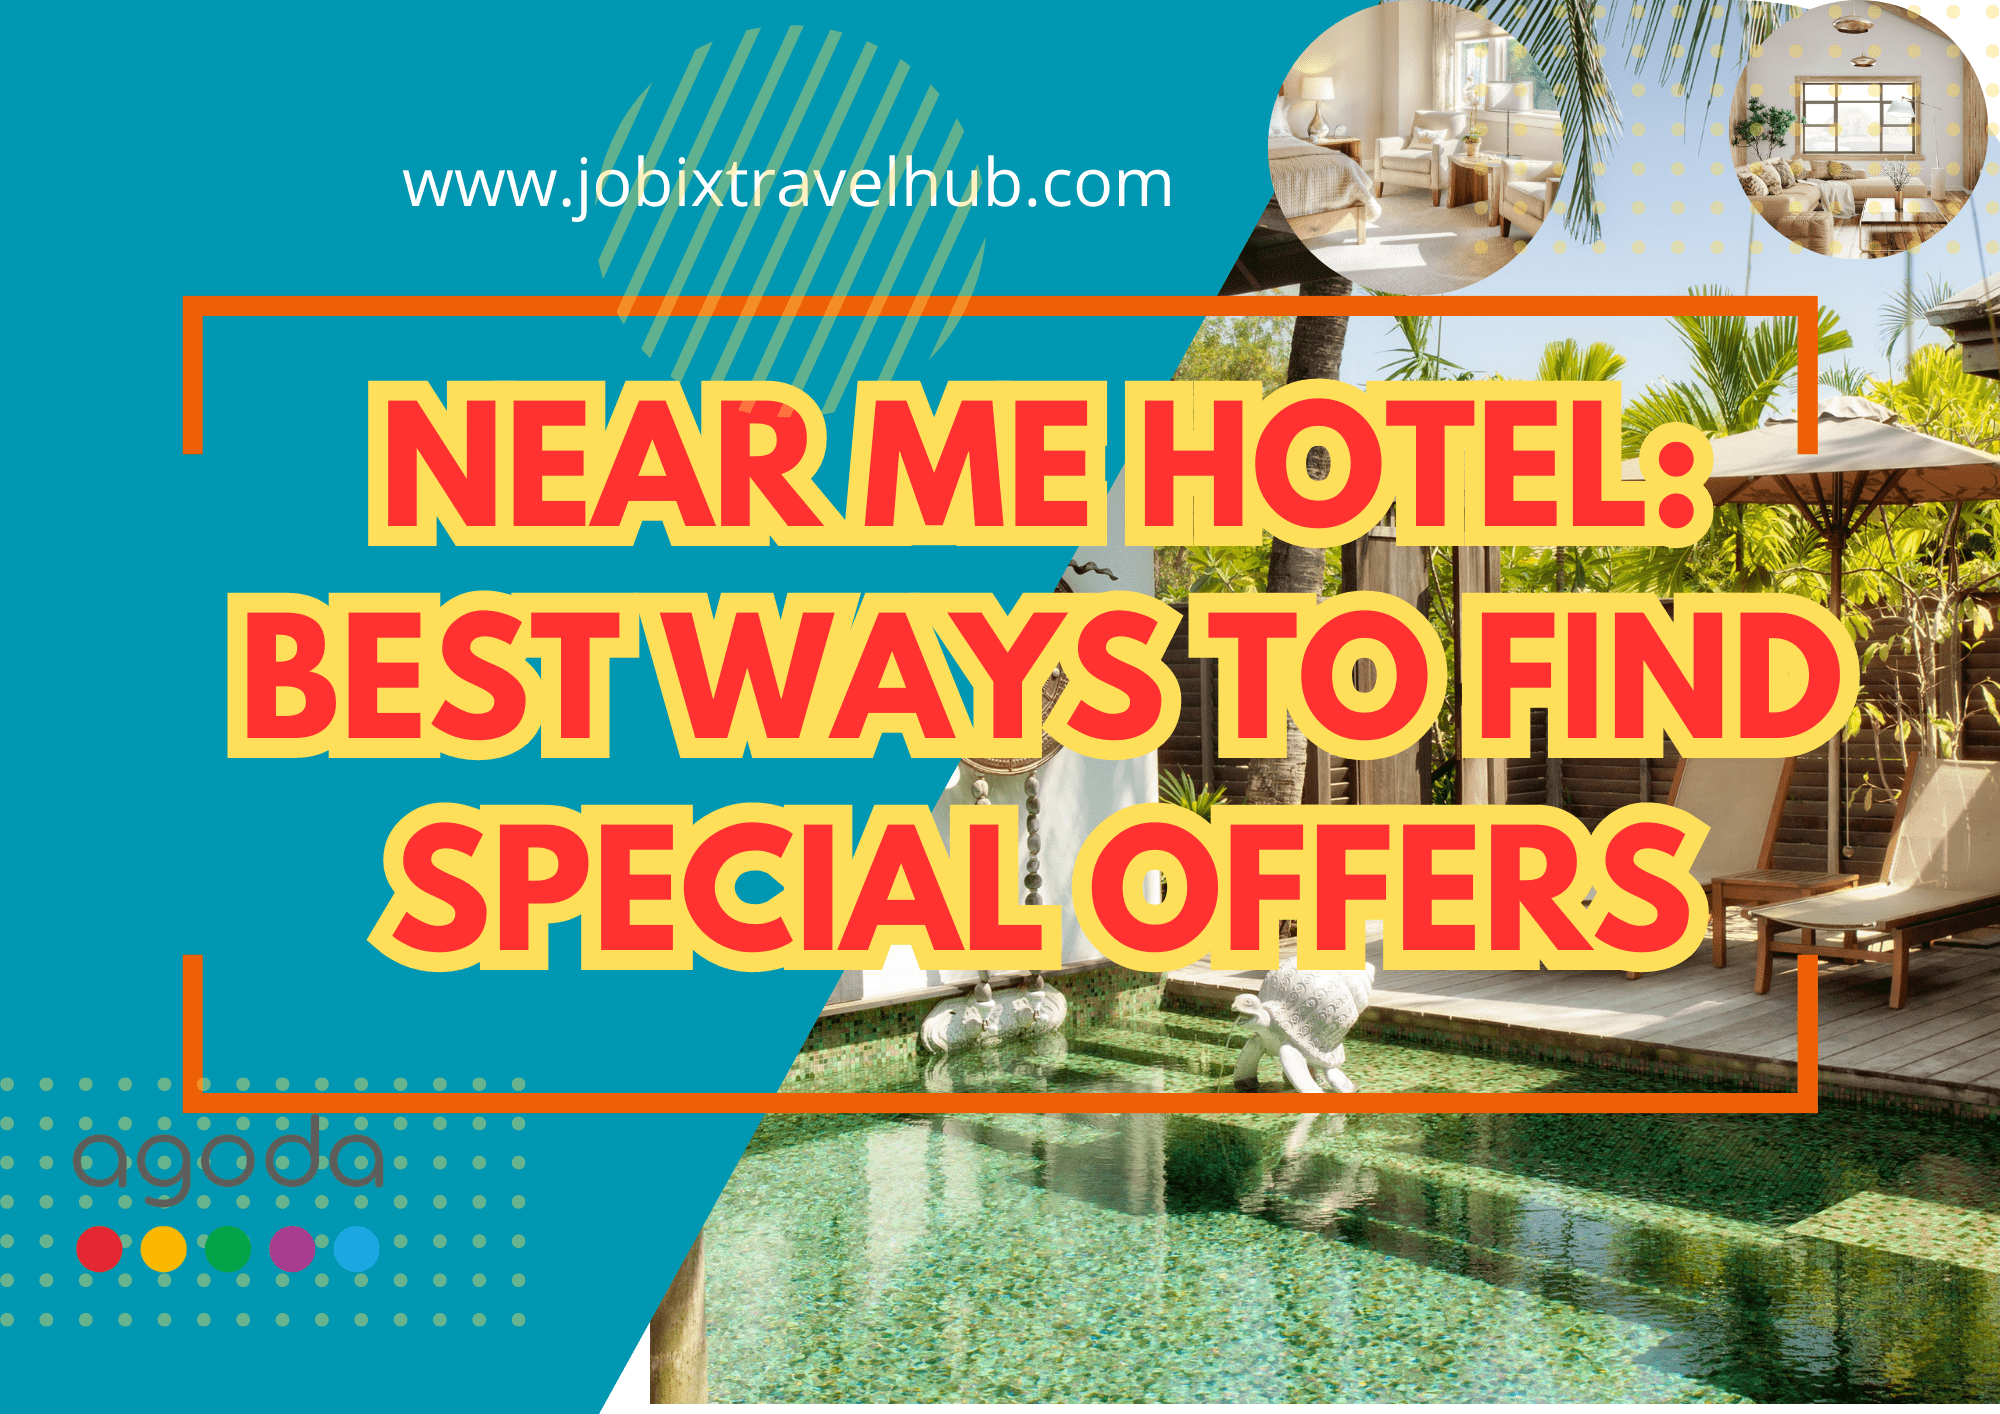 Are you looking for a near-me hotel but do not know where to start? Read on for more information and recommendation on finding a cheap near-me hotel. We will guide you on how to book cheap hotels where you do not need to spend a fortune.